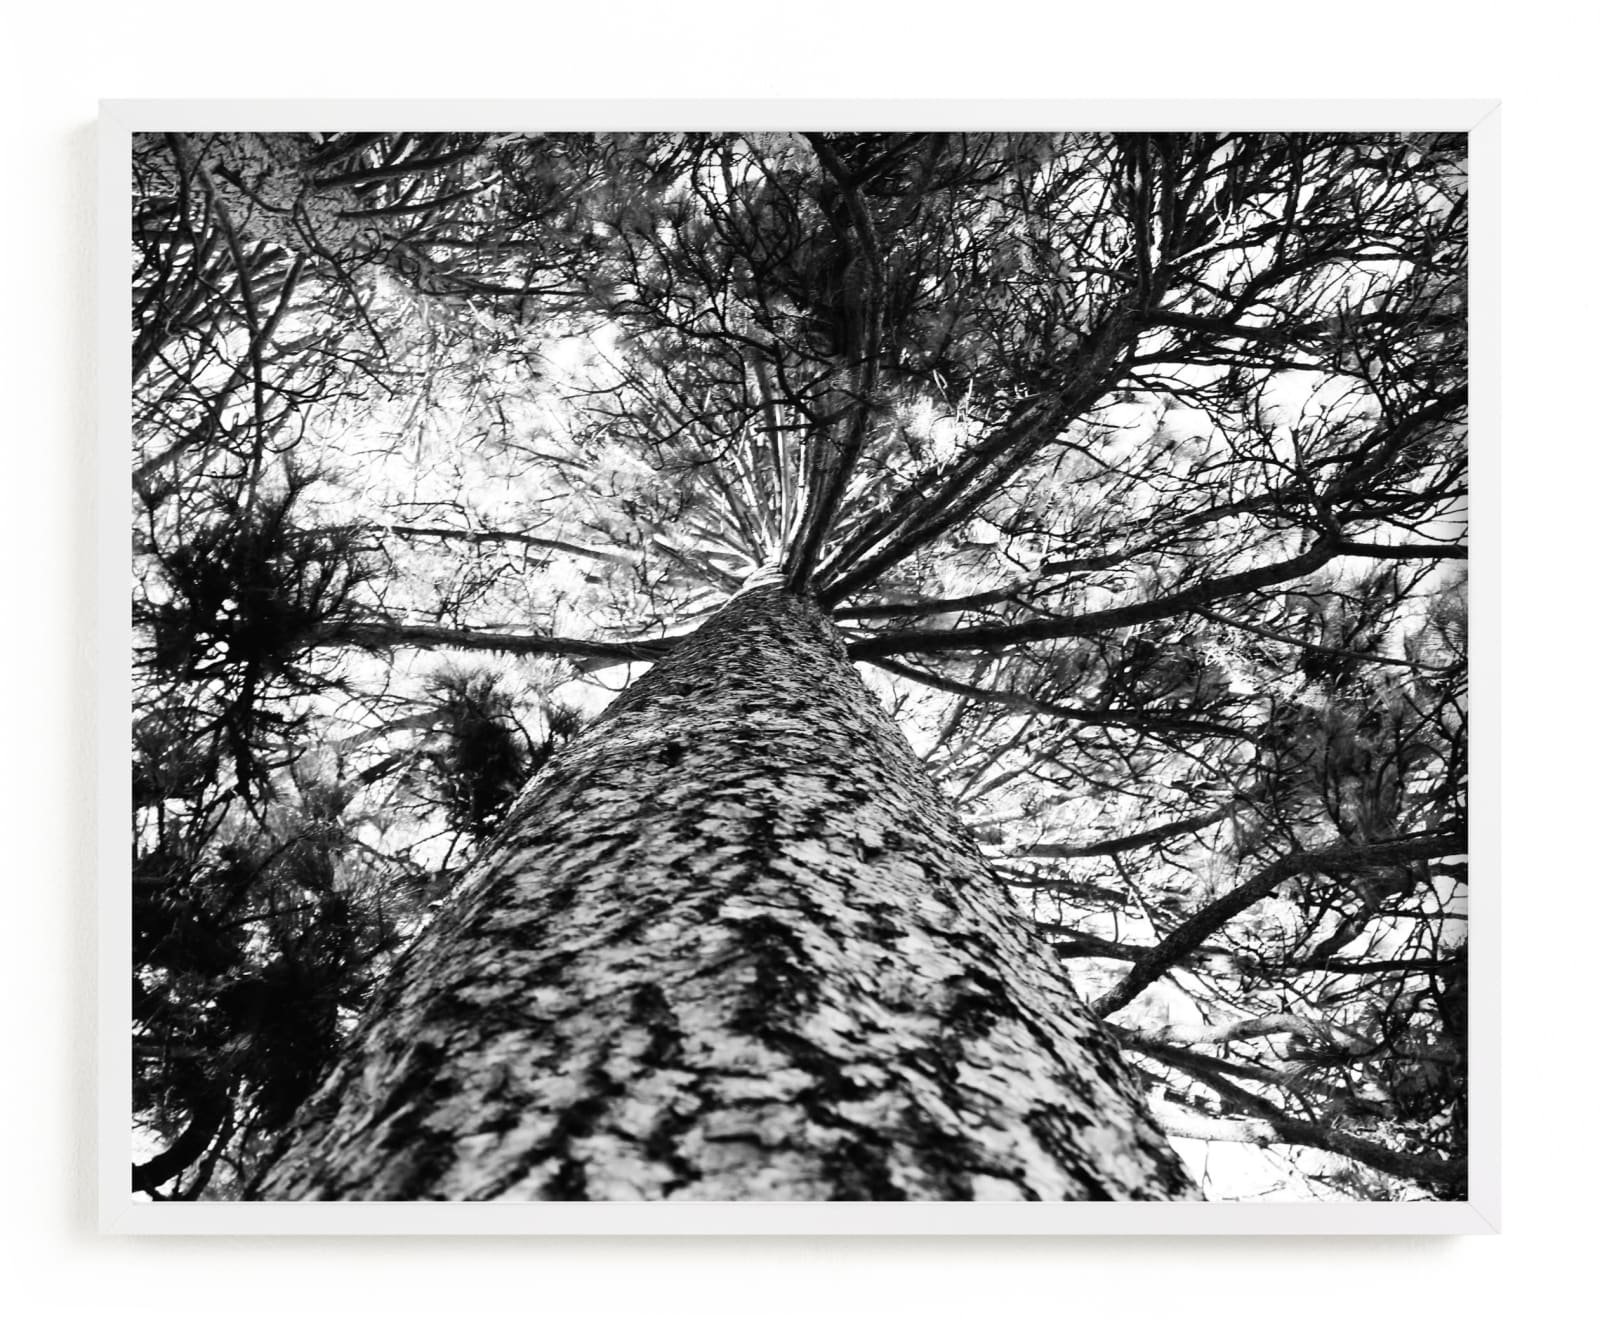 This is a black and white art by Erin Deegan called Ponderosa Pine.